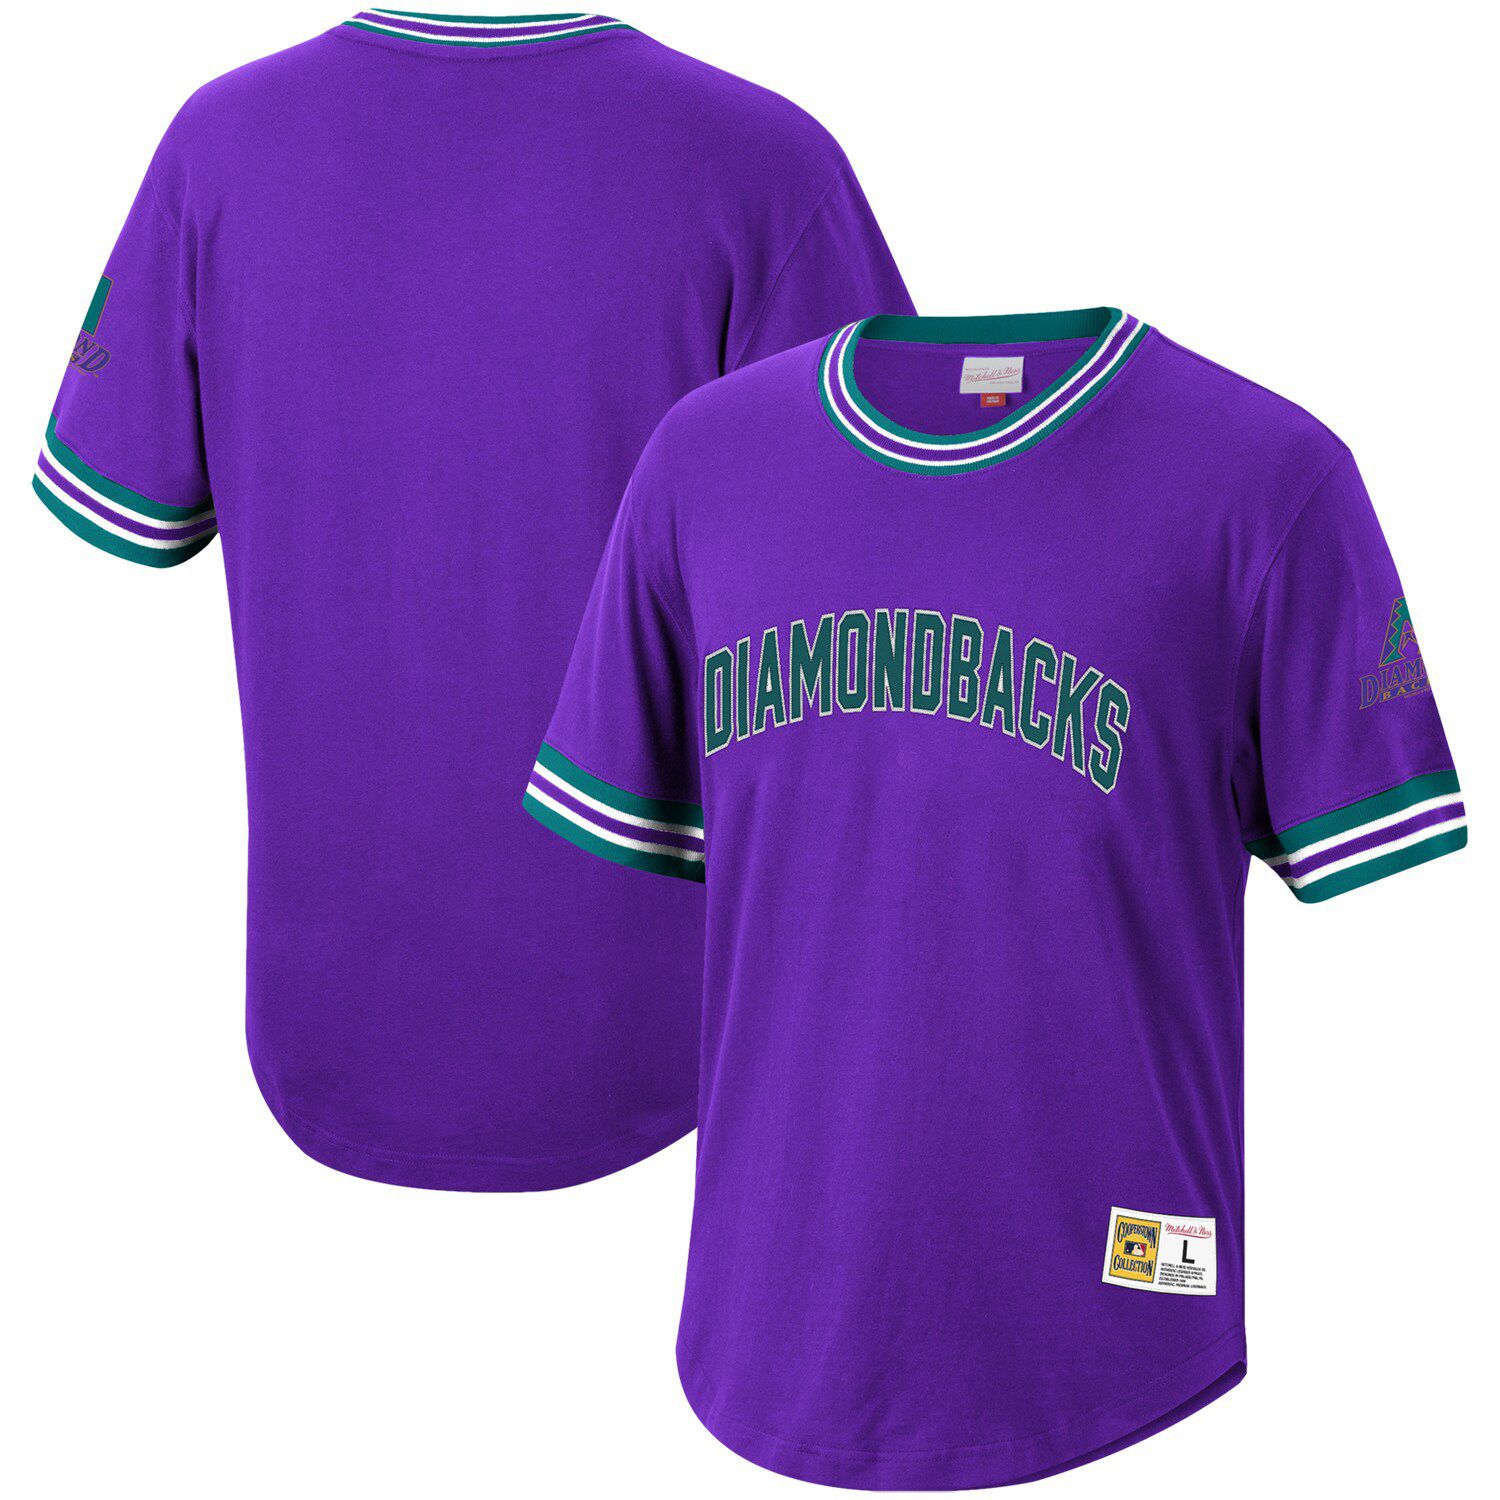 Image for Unbranded Youth Mitchell & Ness Purple Arizona Diamondbacks Cooperstown Collection Wild Pitch Jersey T-Shirt at Kohl's.